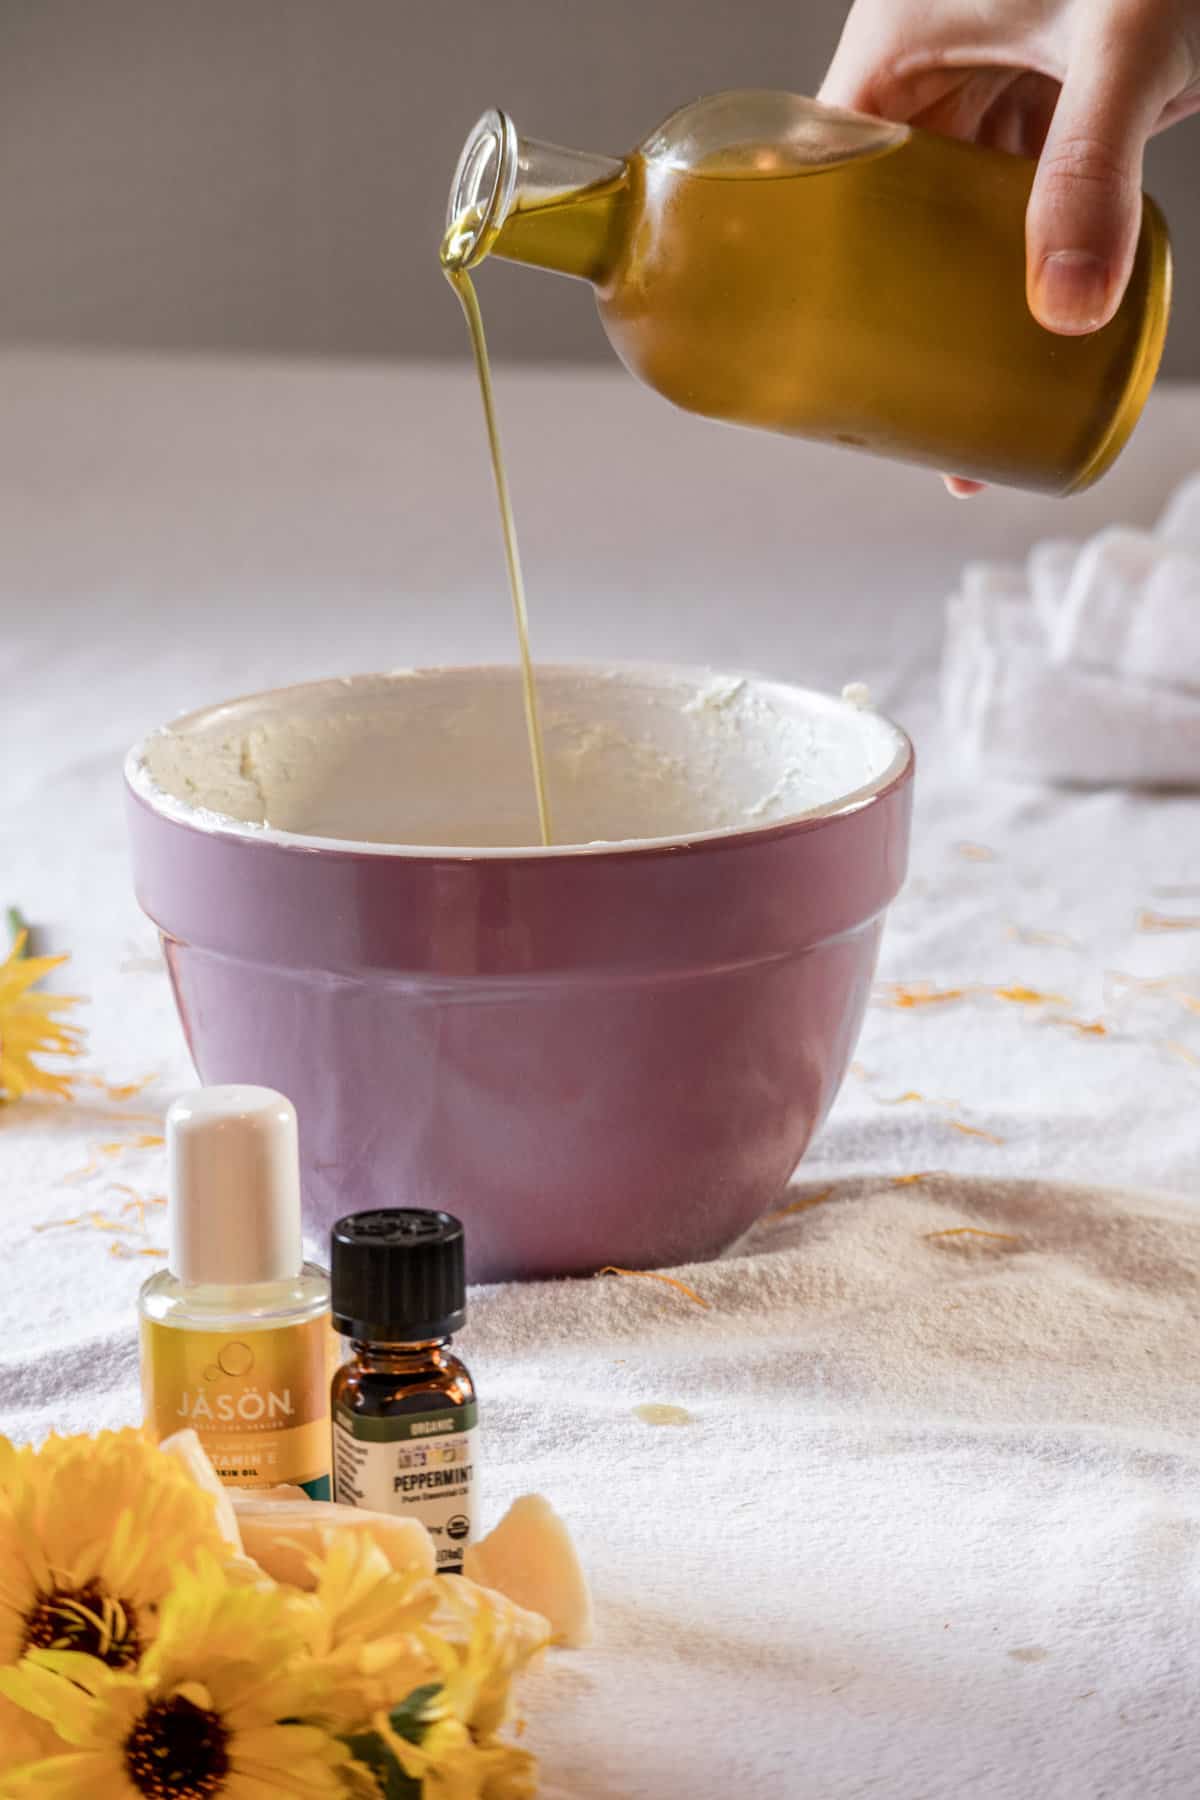 Oil being poured into a bowl of body butter